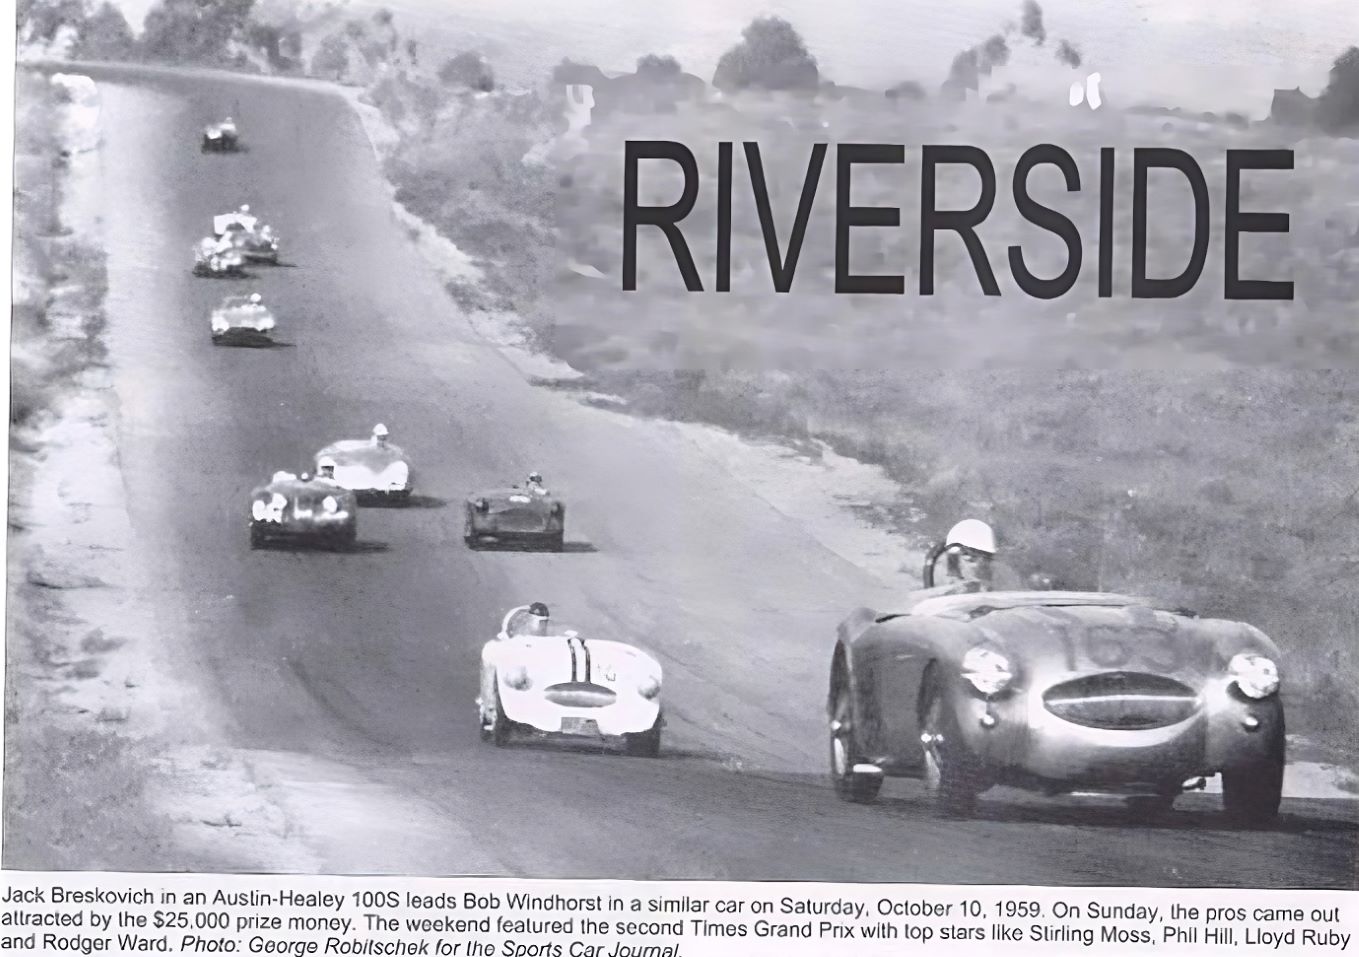 Name:  AH 100S #401 AHS3709 Jack Beskovitch Riverside 3 hour race 1959 #163 w another 100S 174 kb arch .jpg
Views: 195
Size:  173.6 KB